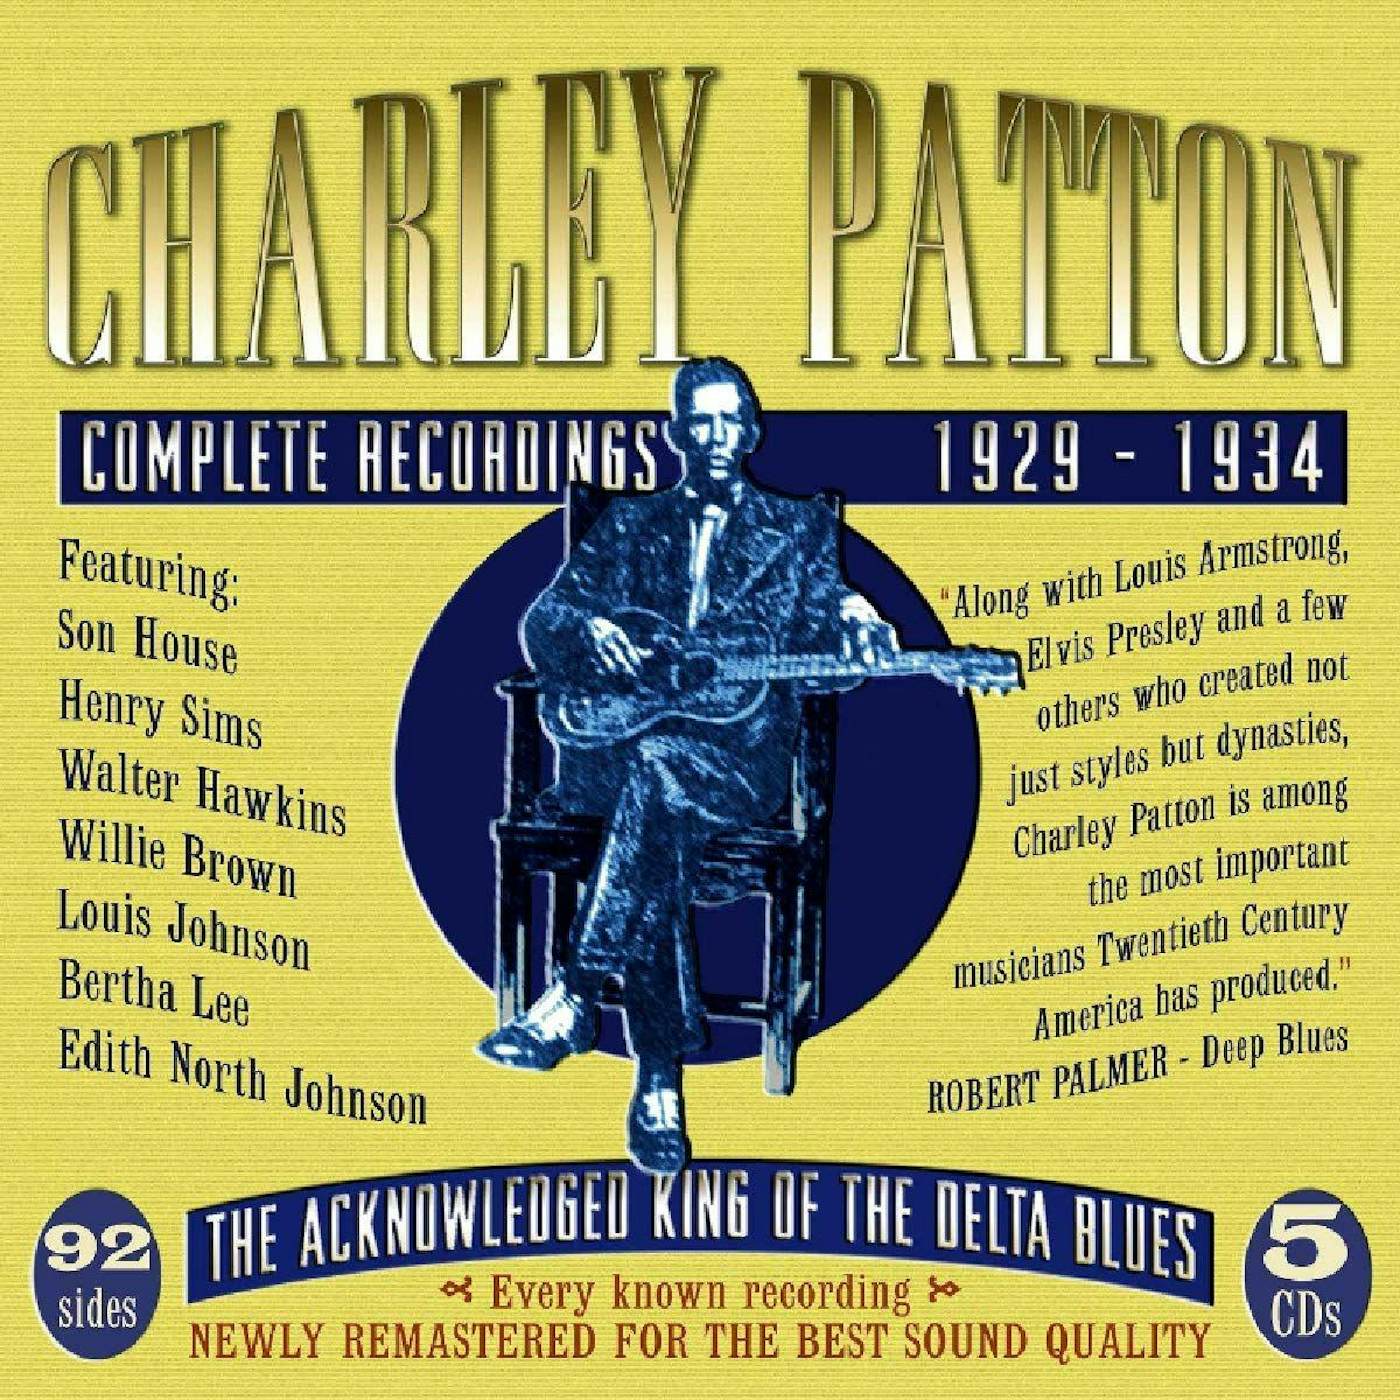 Charley Patton Complete Recordings 1929-34 (5-CD) Box Set